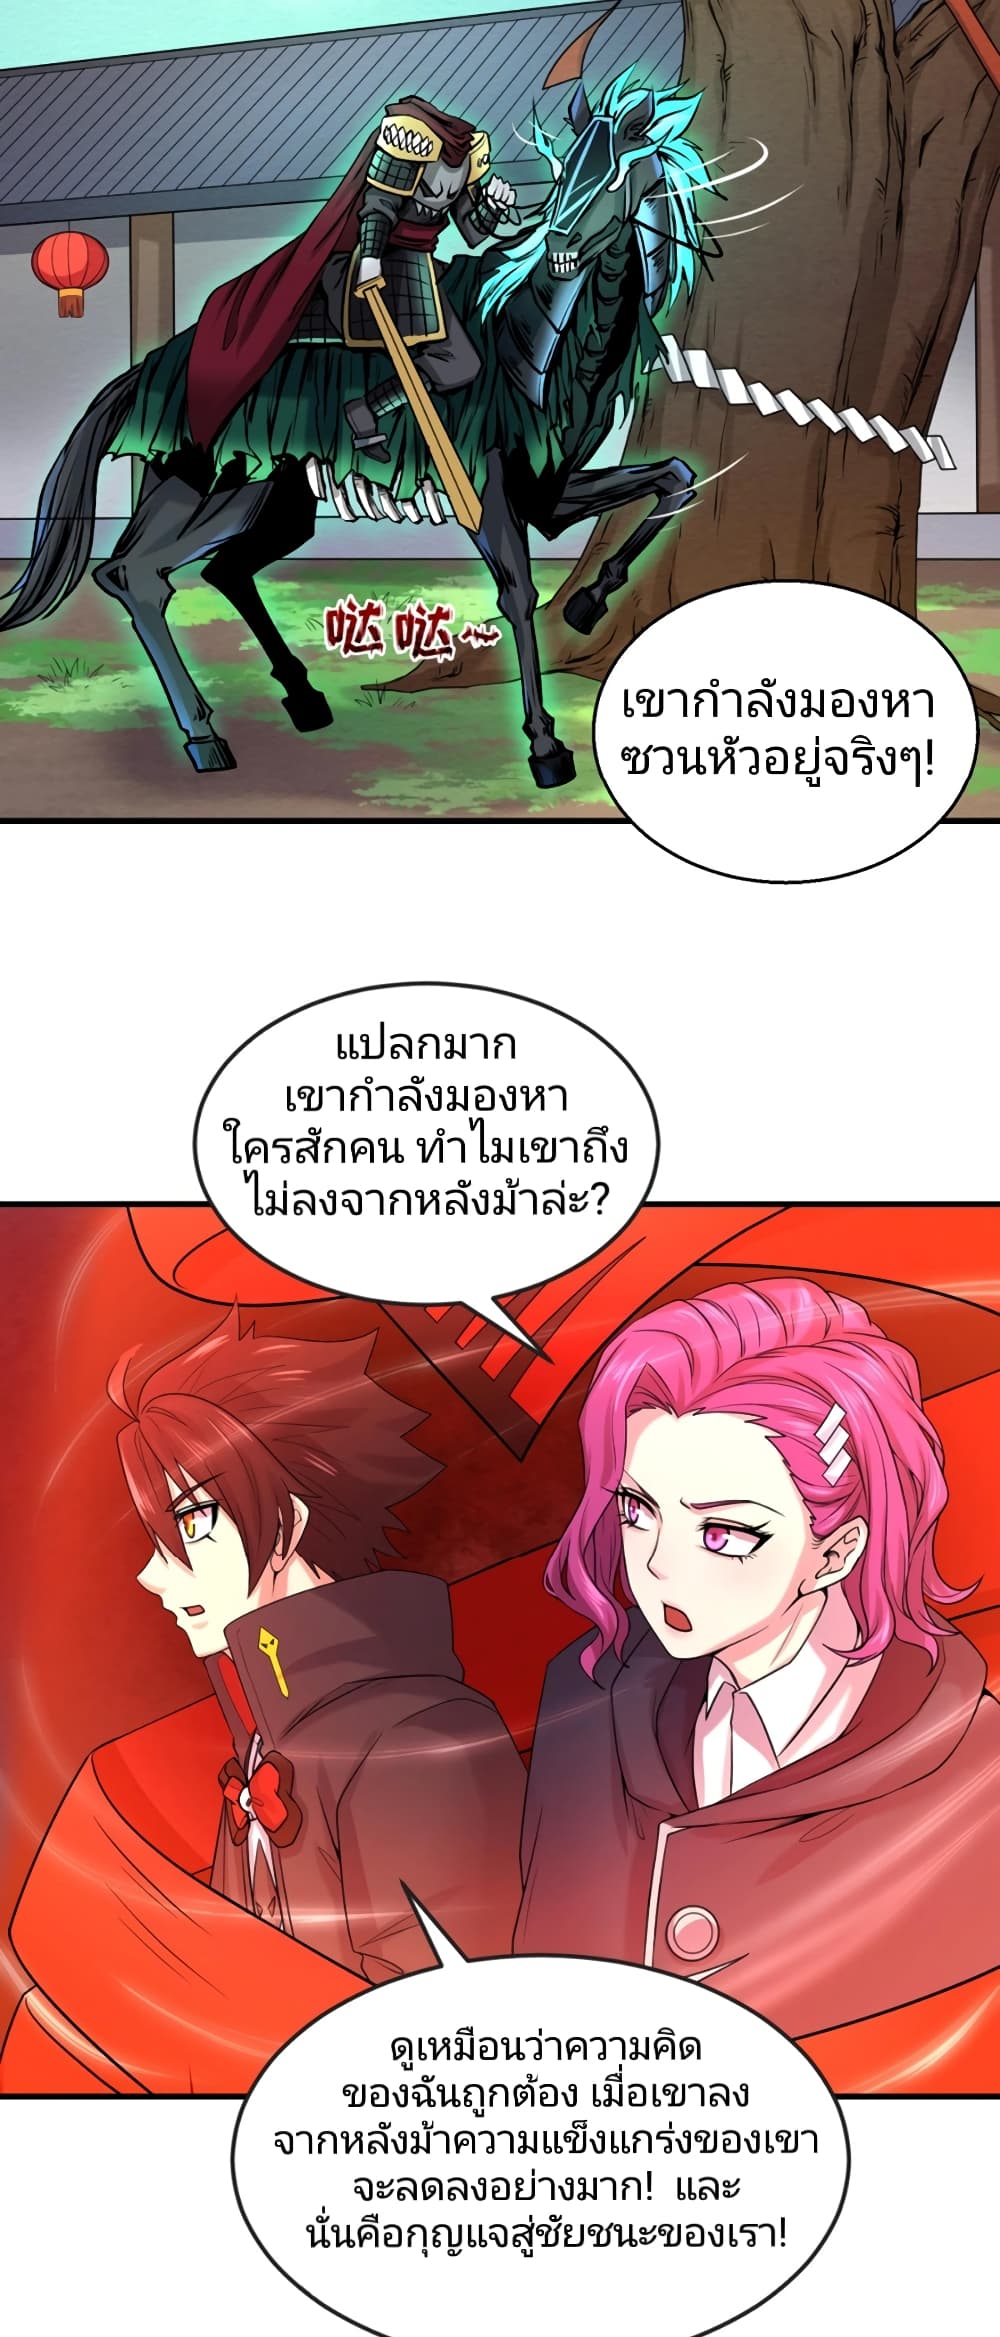 The Age of Ghost Spirits à¸à¸­à¸à¸à¸µà¹ 24 (29)